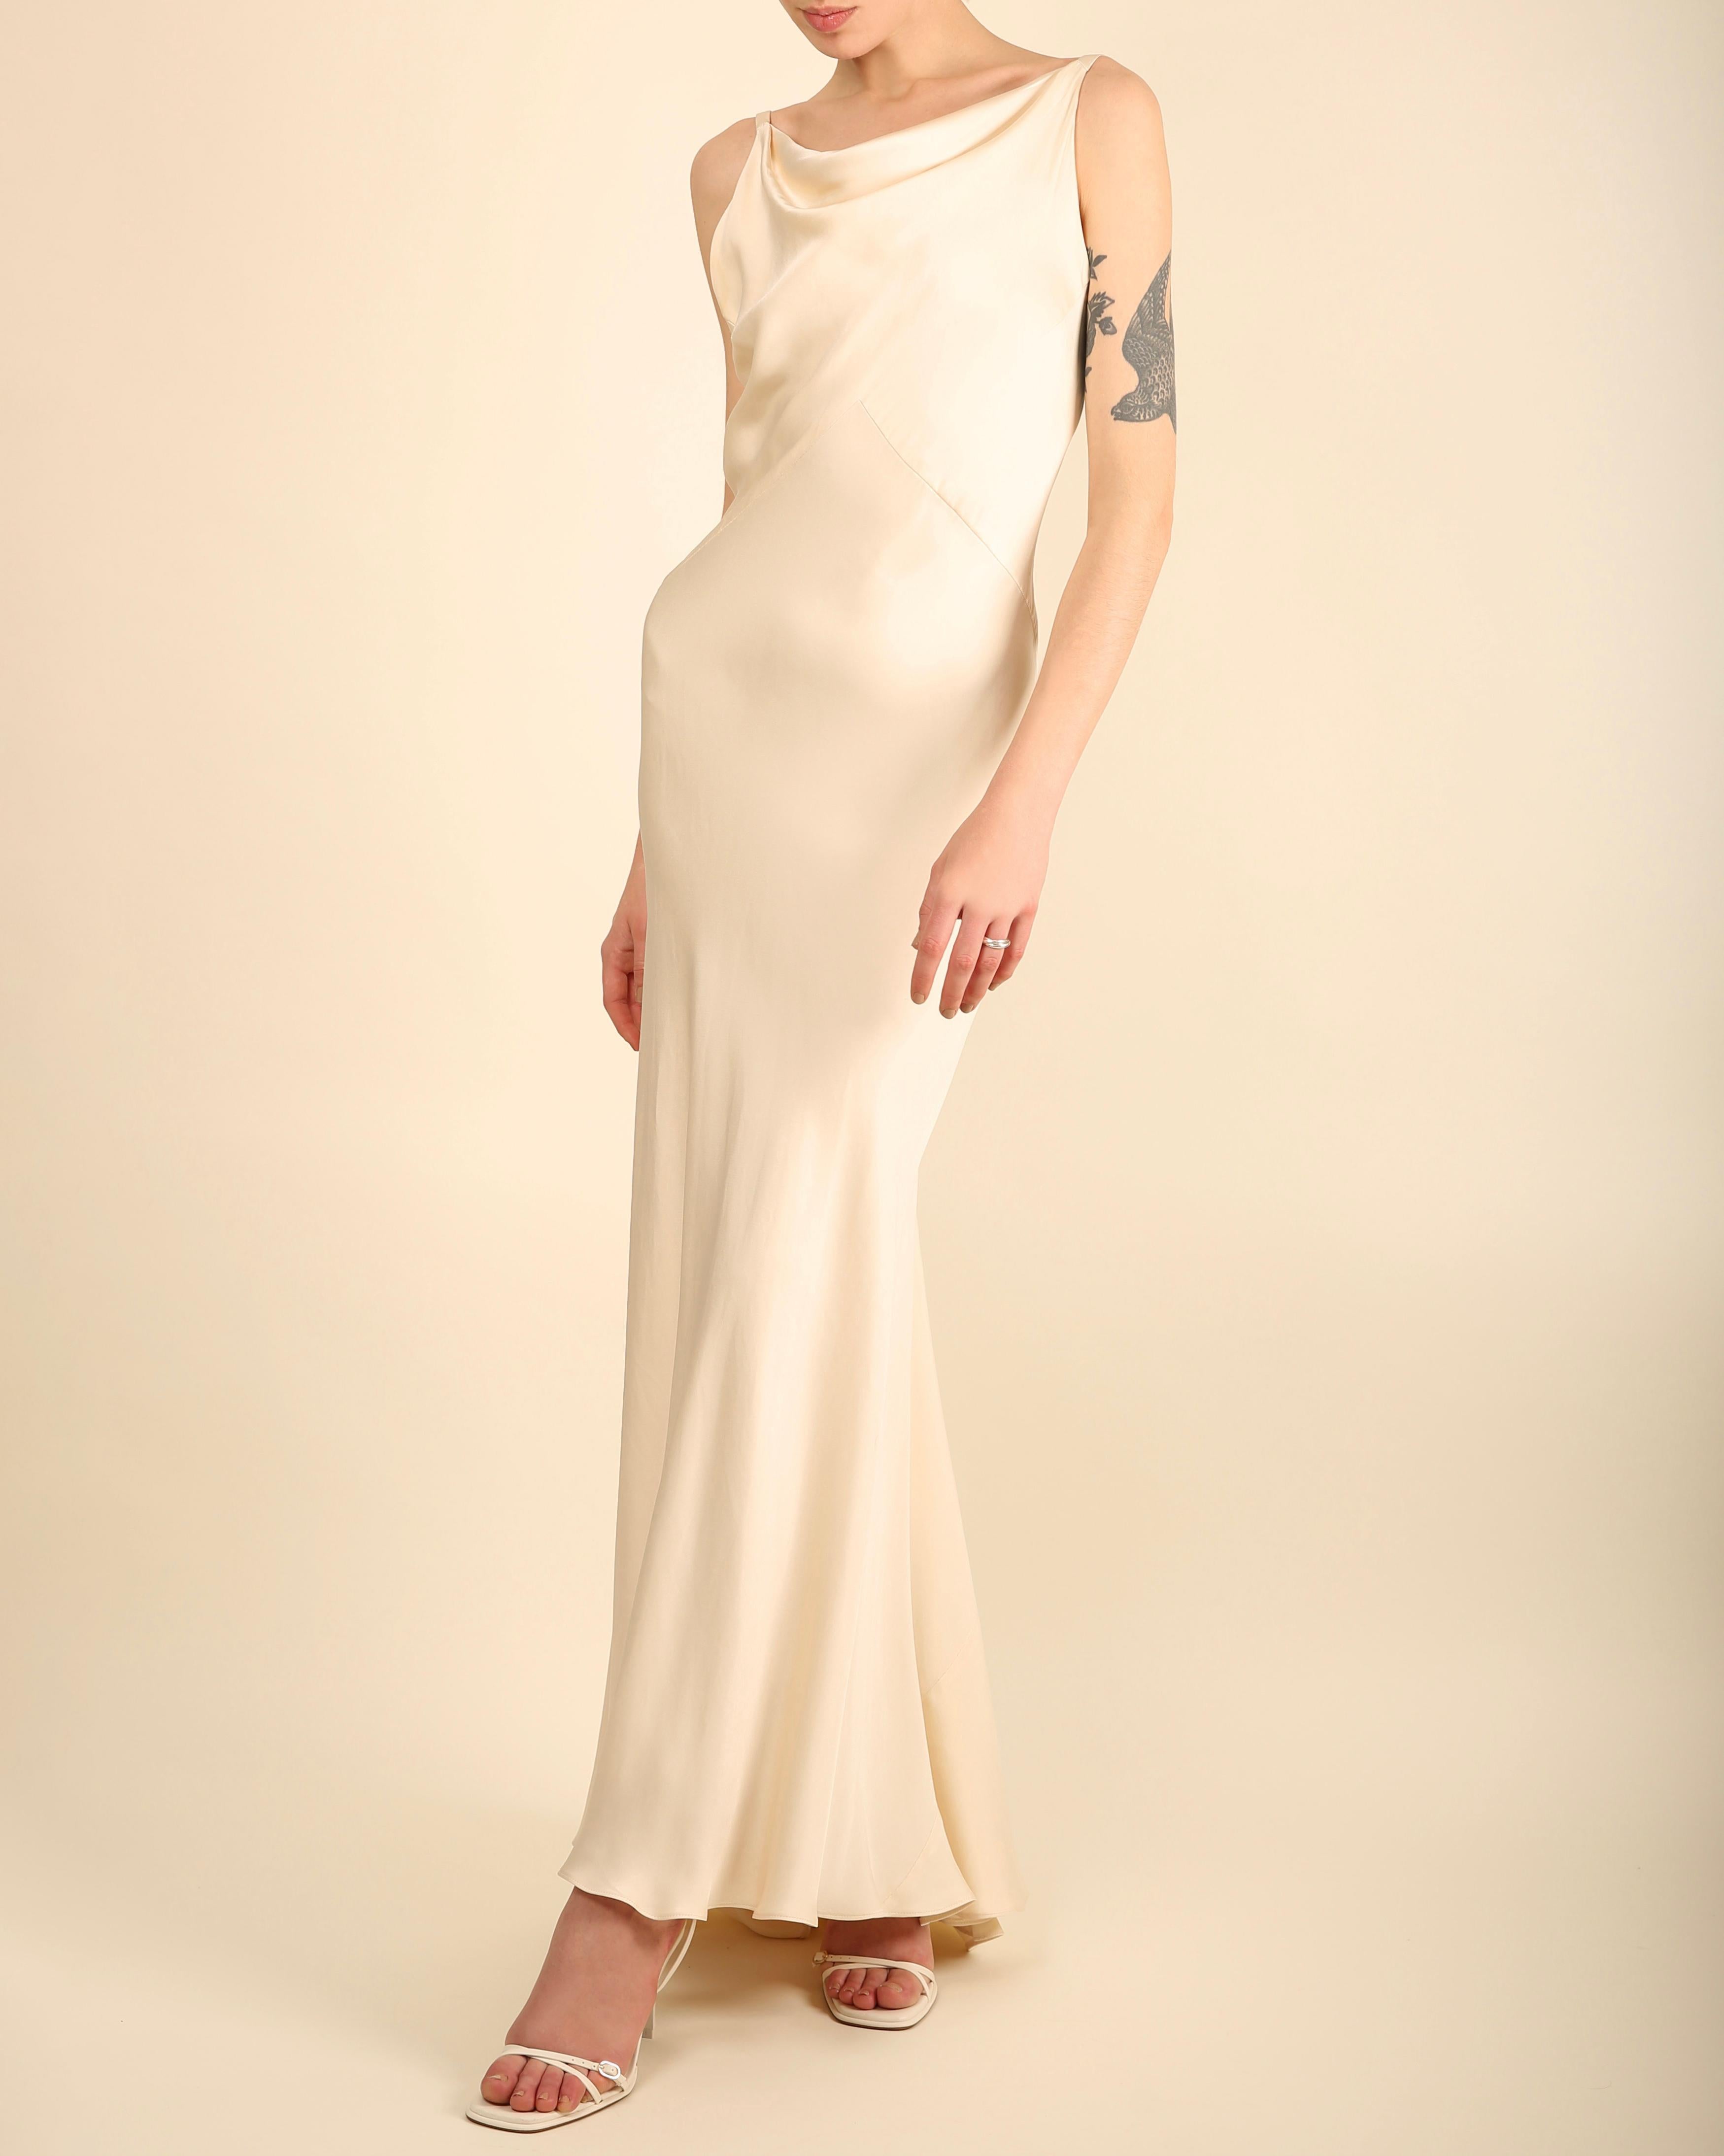 Ralph Lauren champagne bias cut backless silk slip style backless gown dress For Sale 1